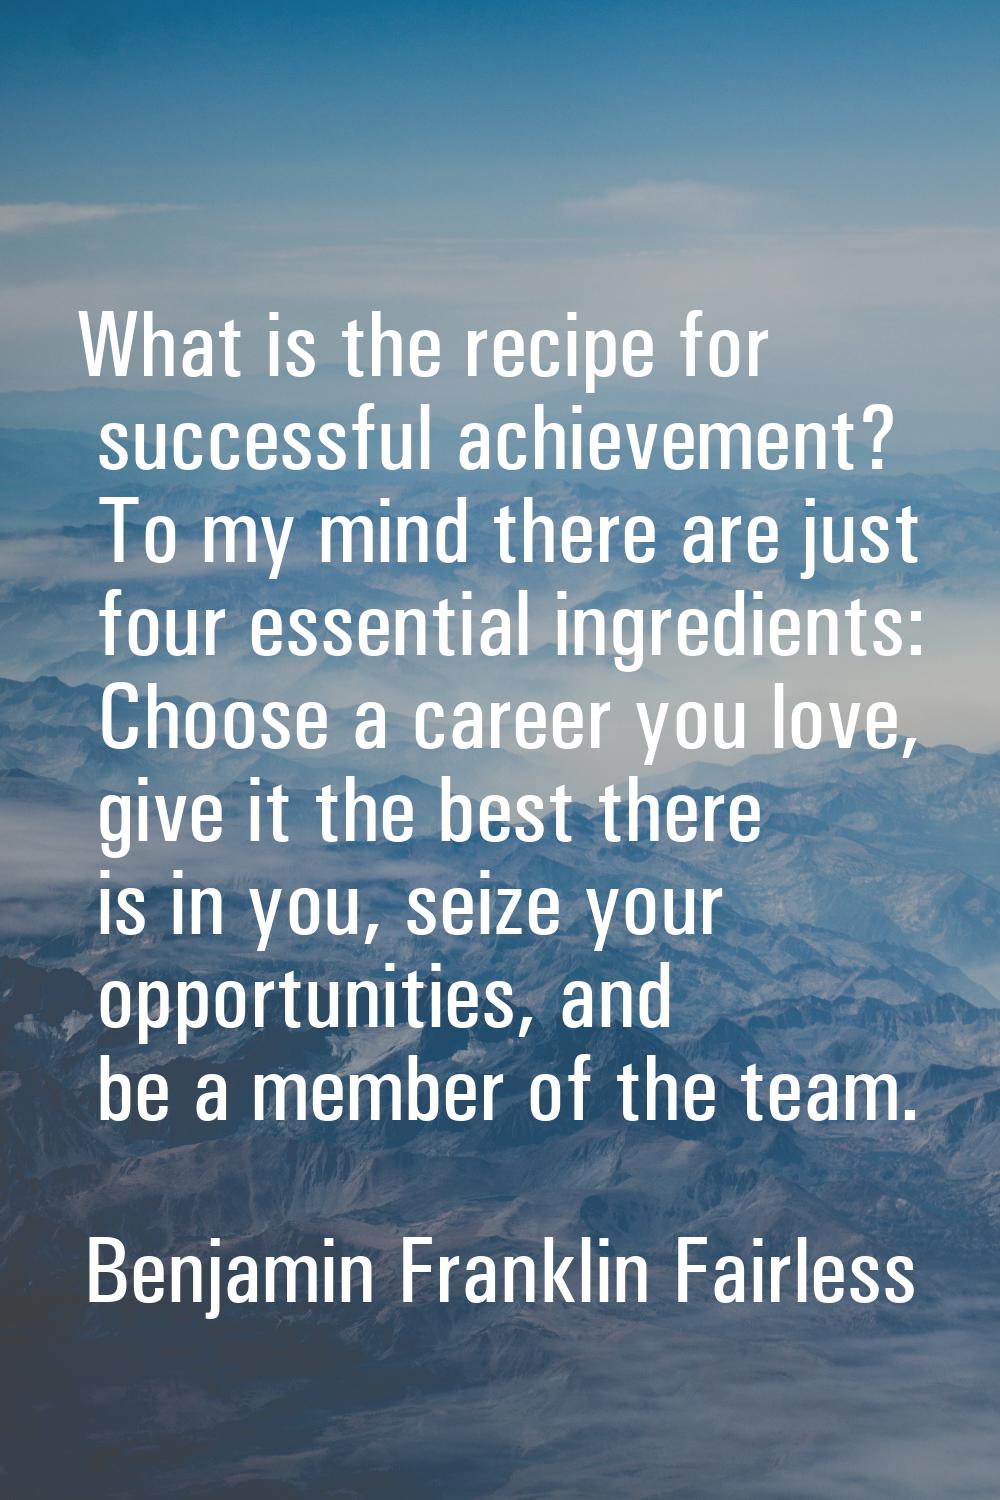 What is the recipe for successful achievement? To my mind there are just four essential ingredients